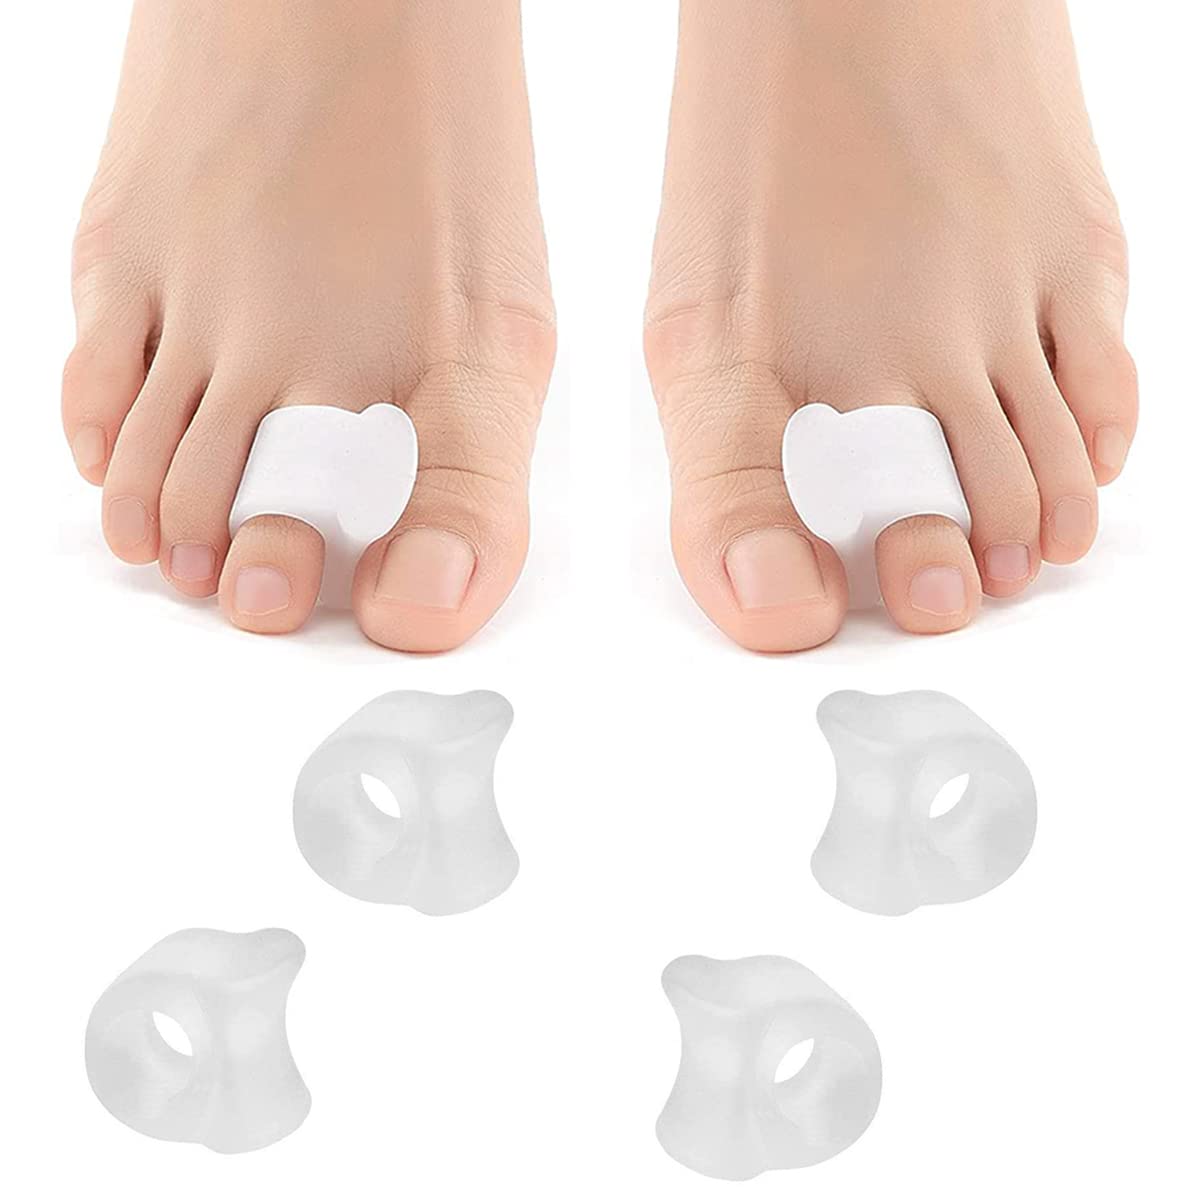 Bunion Pads Toe Separators Toes Corrector for Bunions Pain Overlapping ...